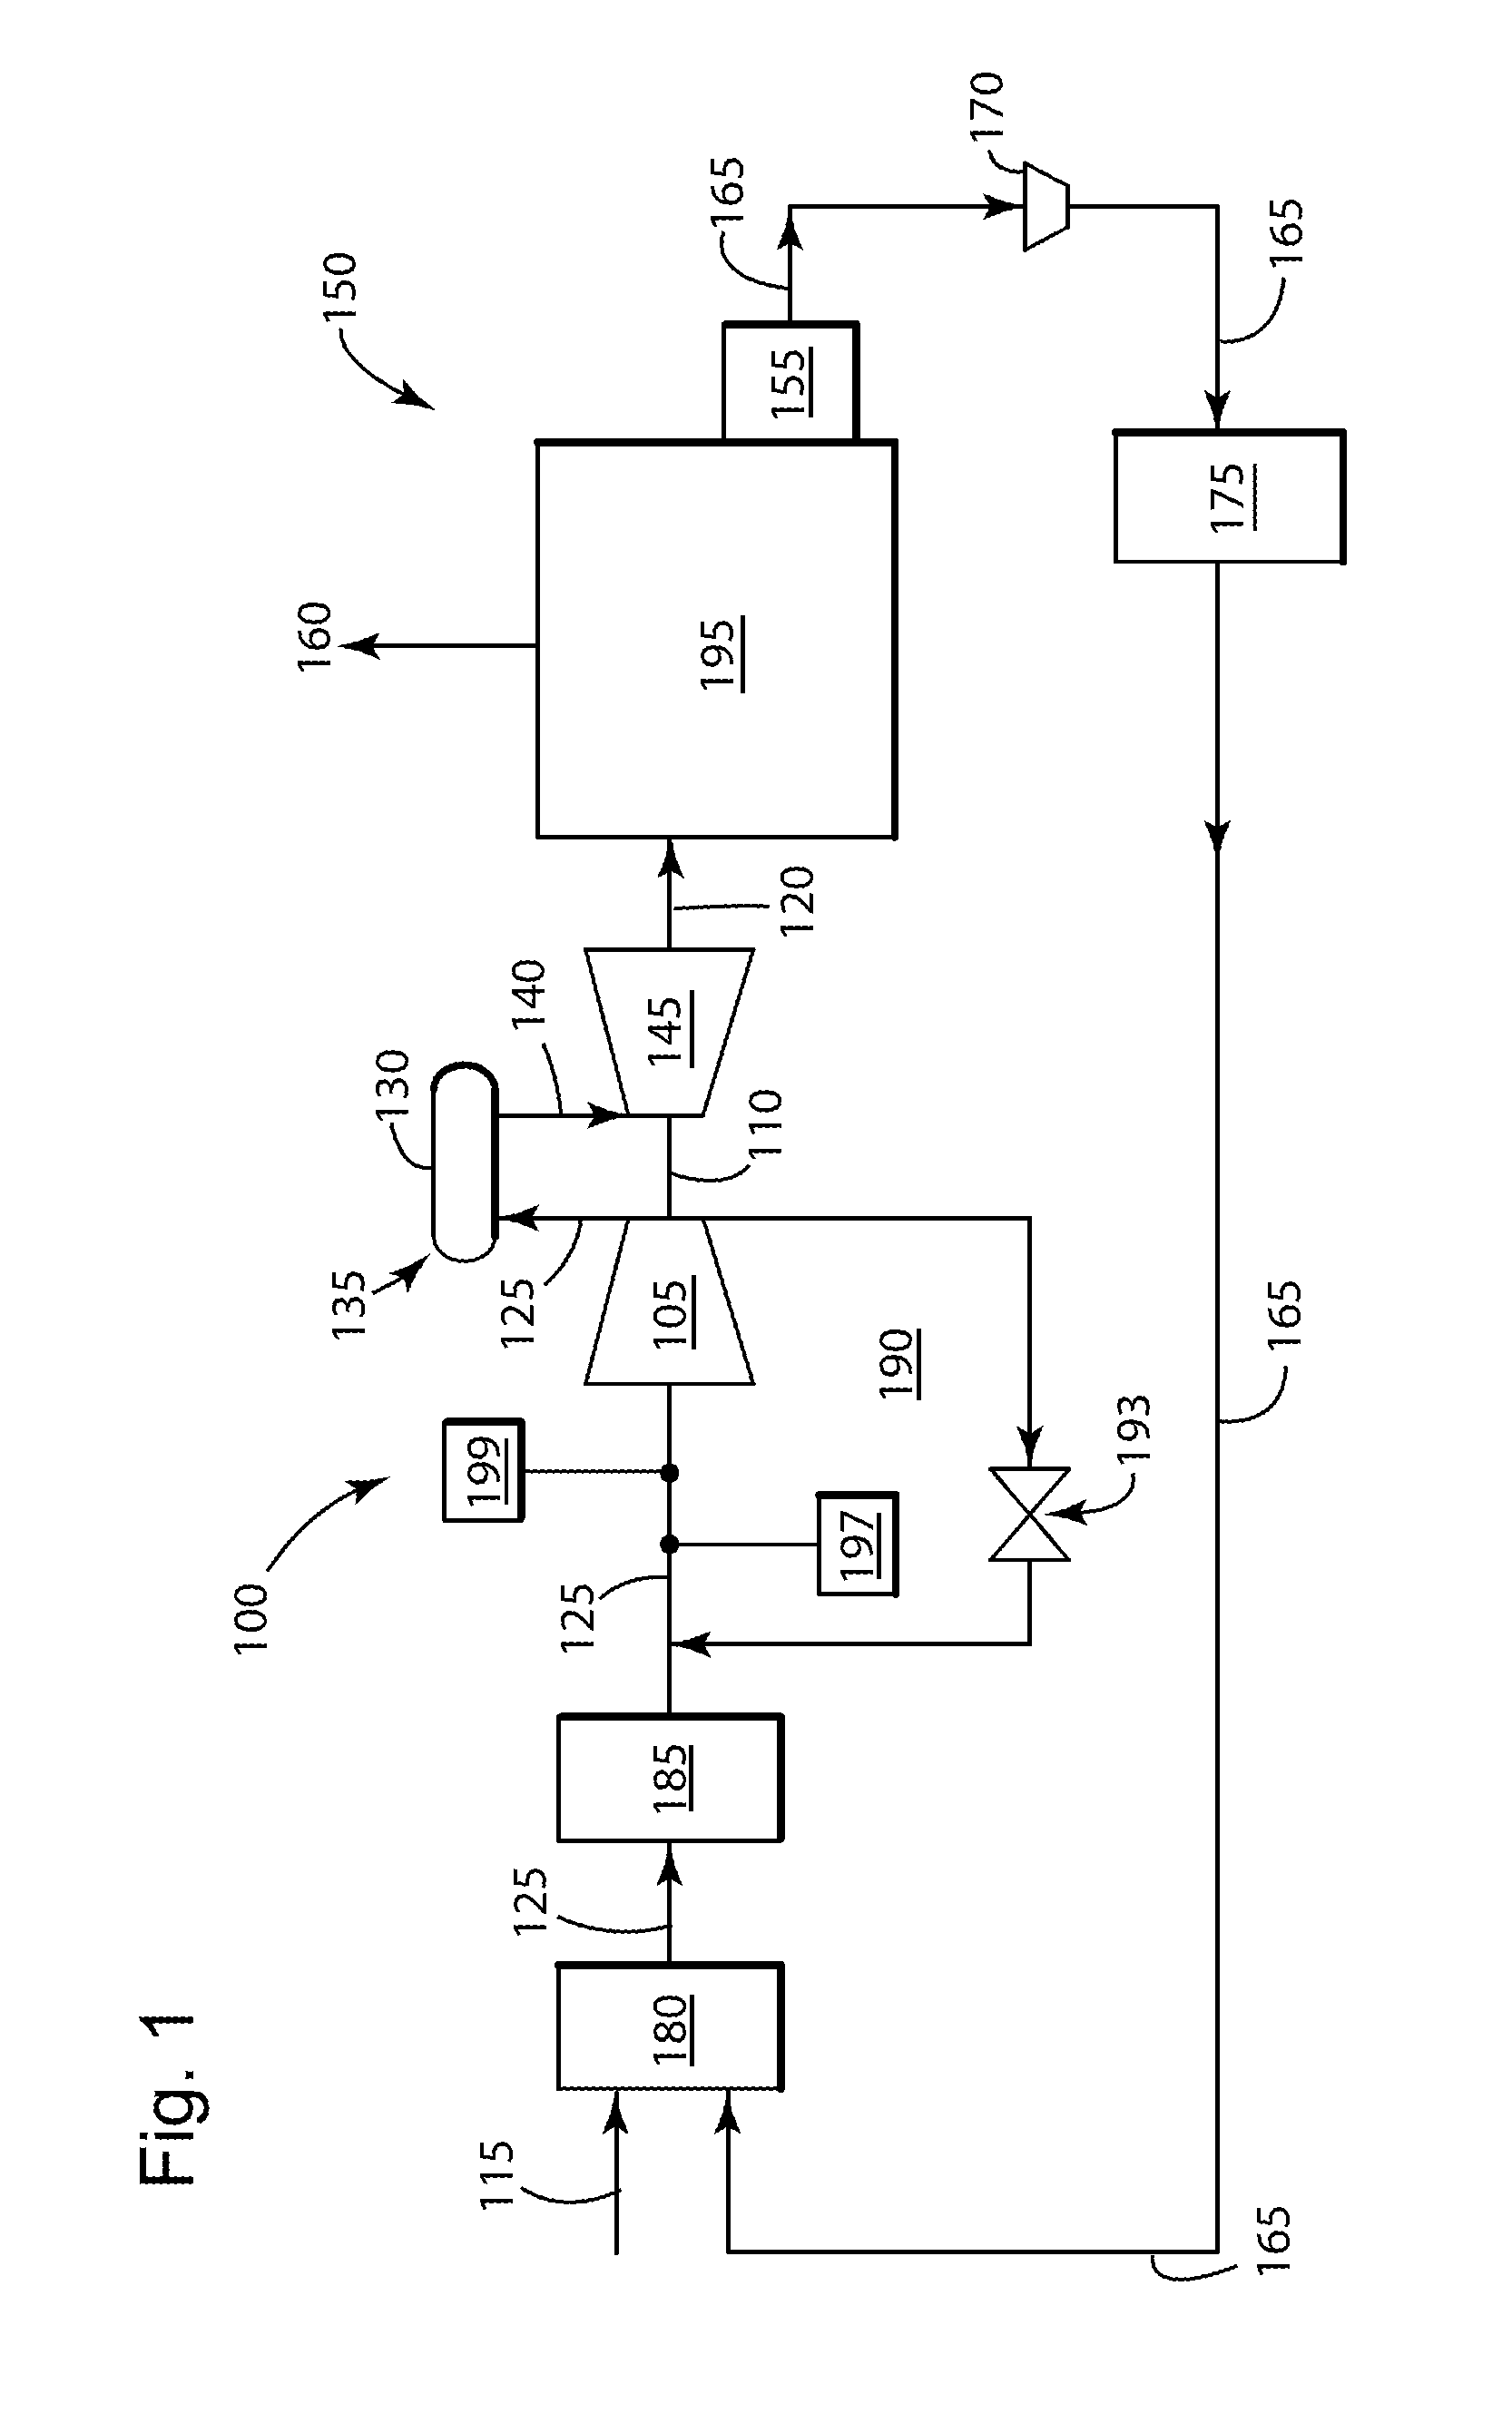 Method for controlling an exhaust gas recirculation system